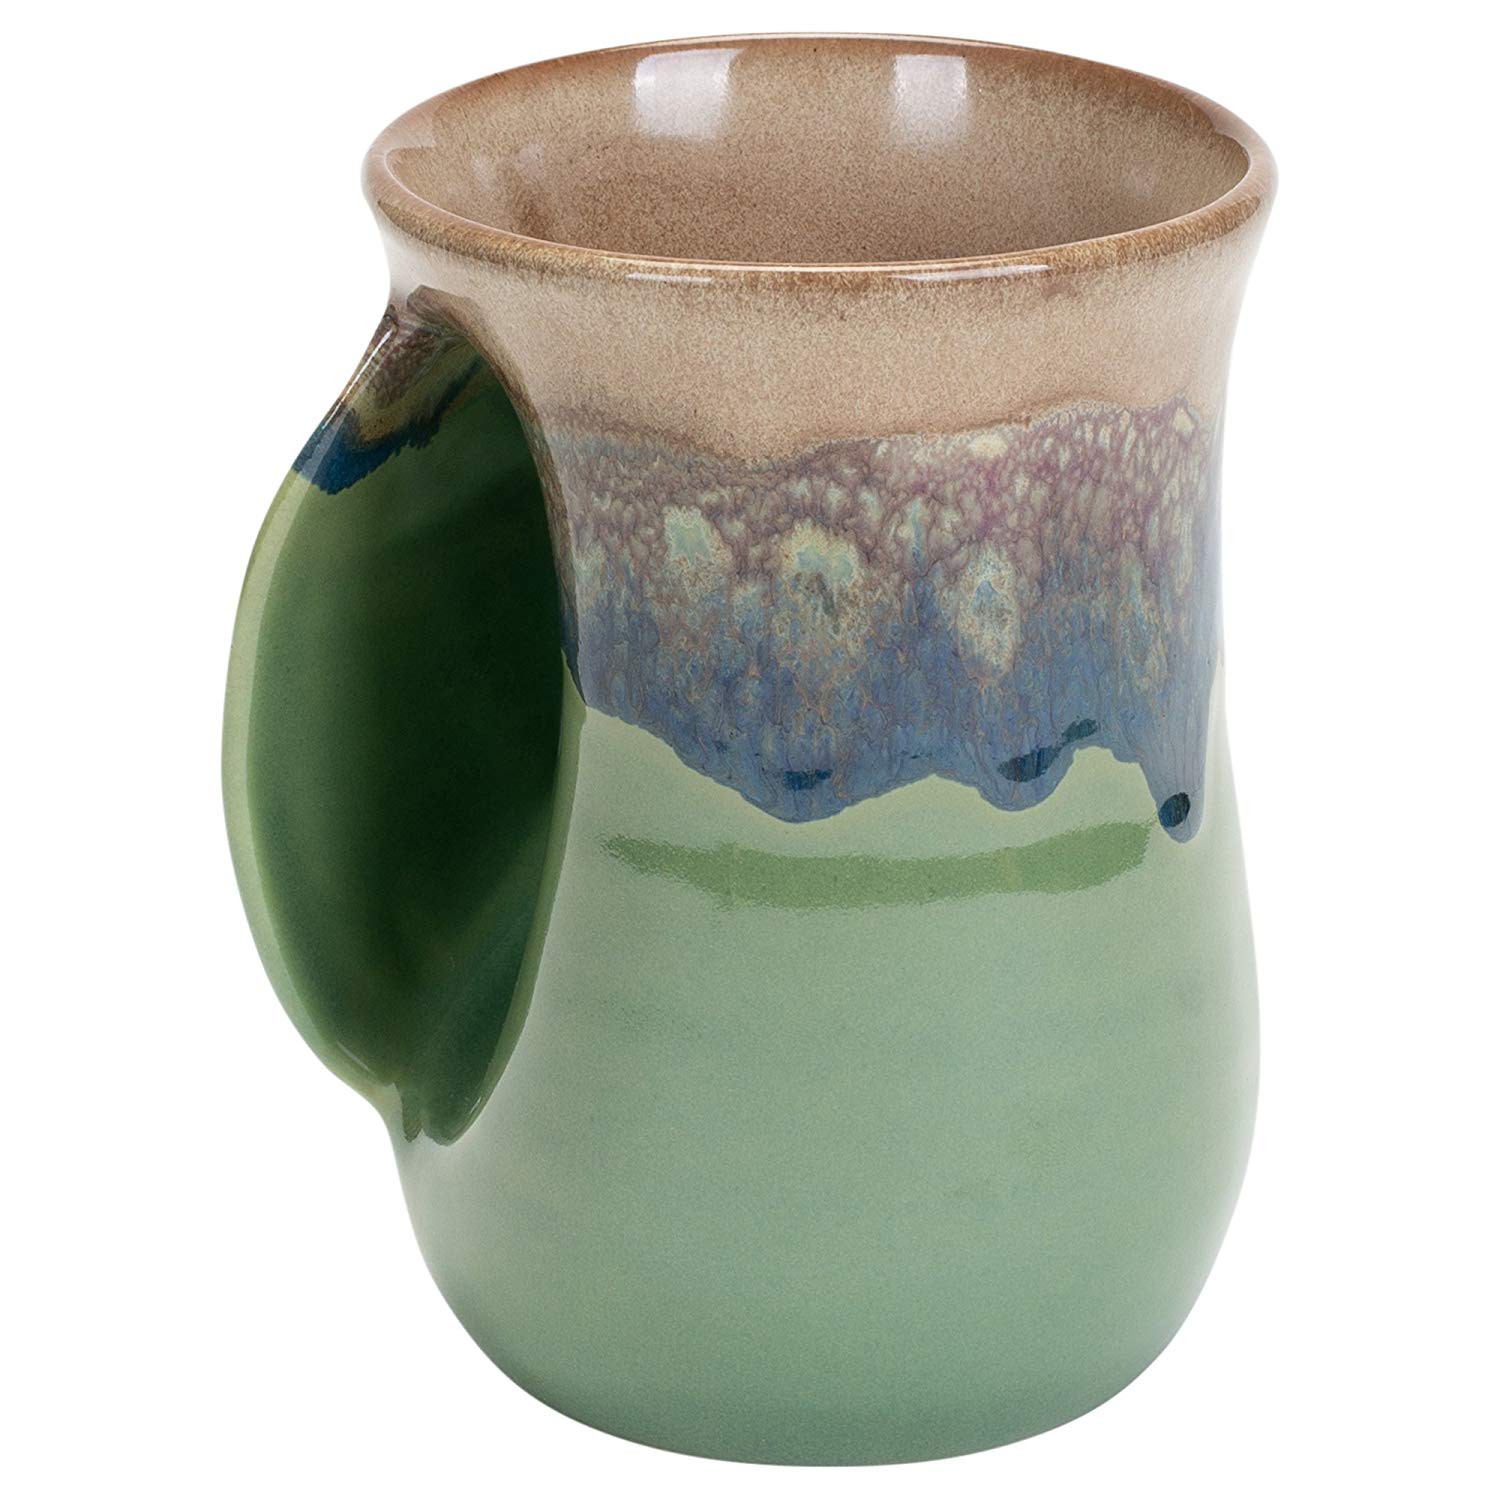 10 Elegant Red Clay Pottery Vases 2024 free download red clay pottery vases of amazon com clay in motion handwarmer mug mountain meadows left with regard to amazon com clay in motion handwarmer mug mountain meadows left handed kitchen dining